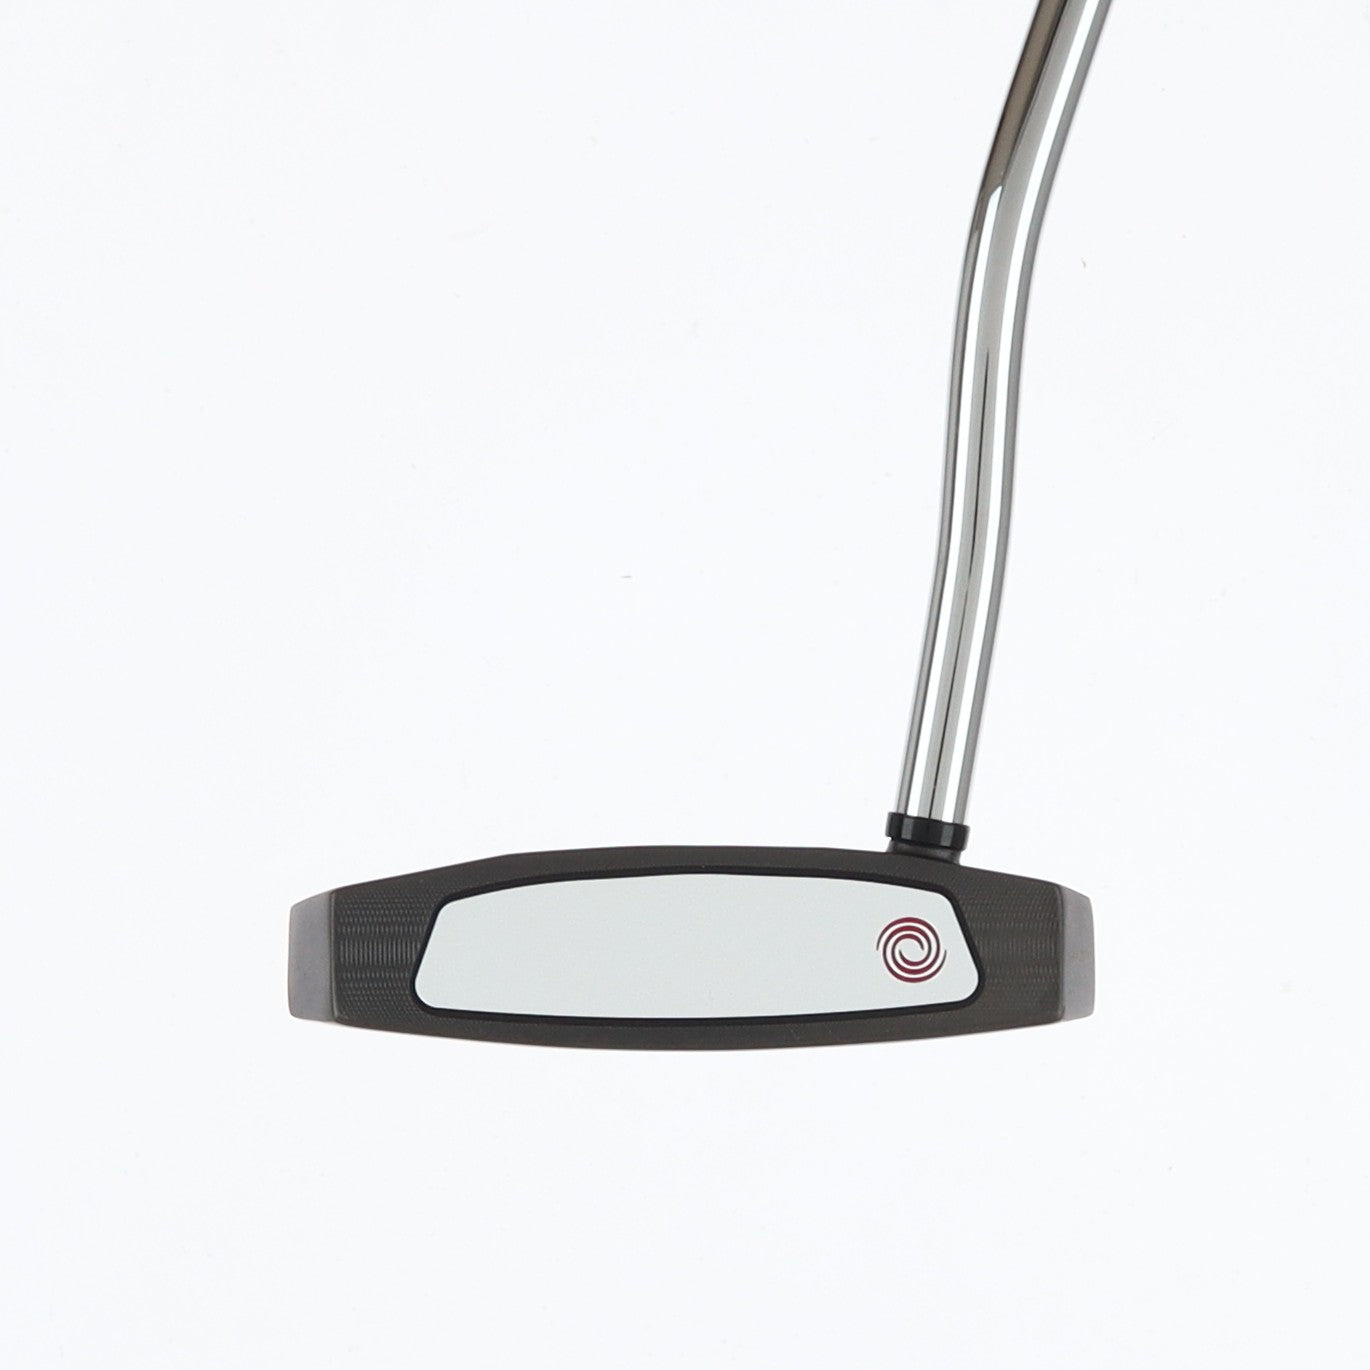 Odyssey Putter Open Box Left-Handed 2-BALL ELEVEN TOUR LINED 34 inch